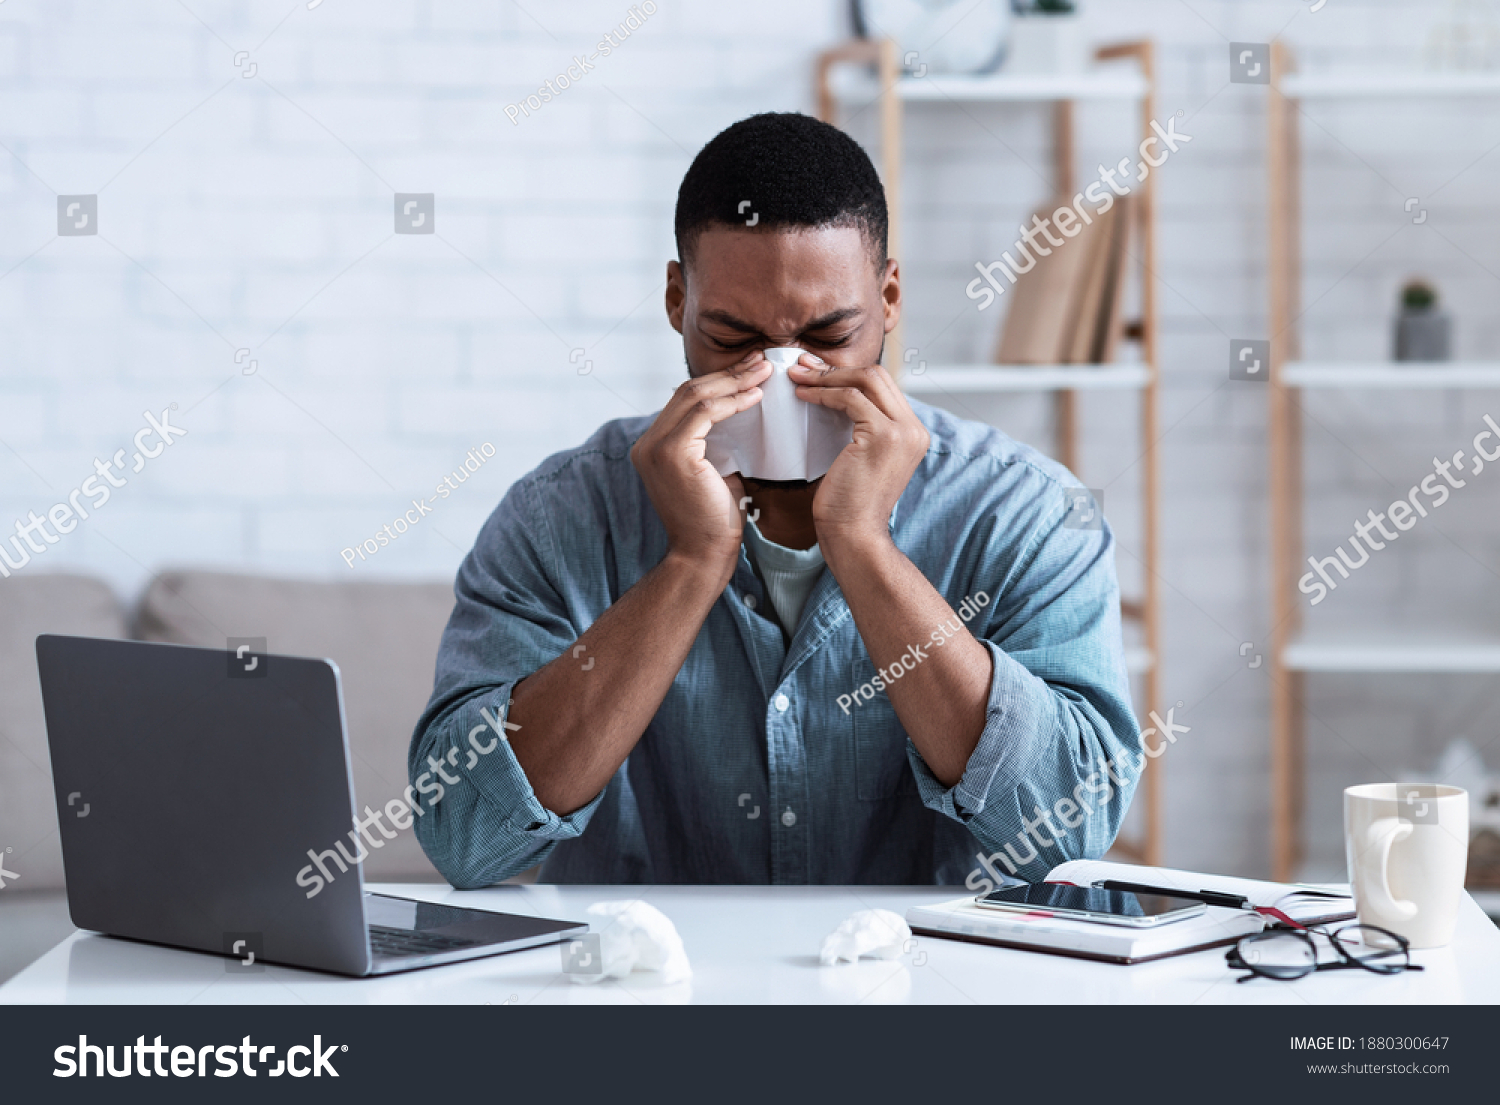 Sick Black Guy Working In Office, Sitting At Laptop And Blowing Nose In Paper Napkin Indoors. Ill Employee Concept. African Man Having Cold, Rhinitis And Sinusitis Symptoms At Work. #1880300647